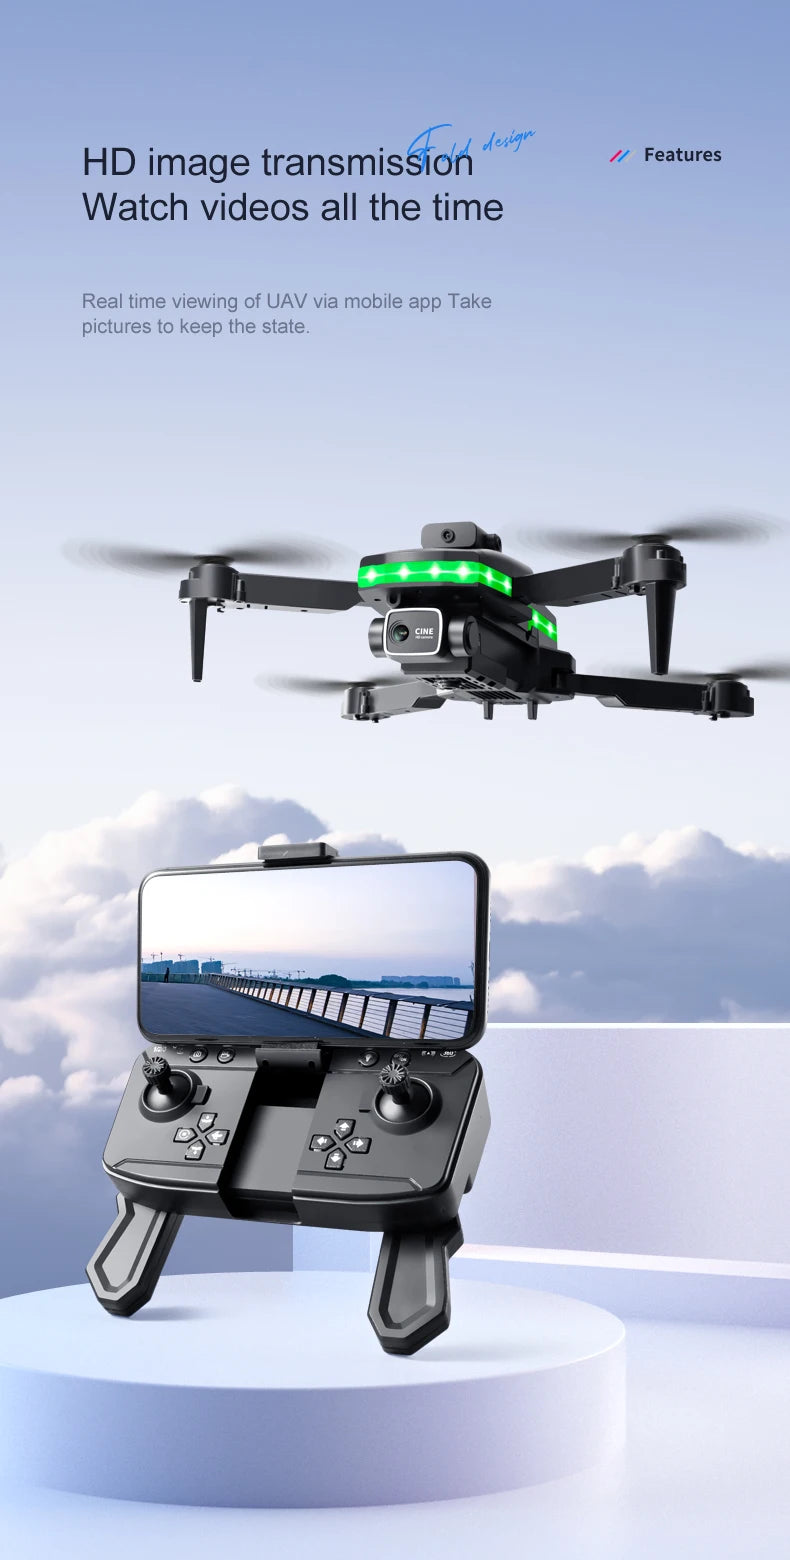 S160 Mini Drone, desigr hd image transmission features watch videos all the time